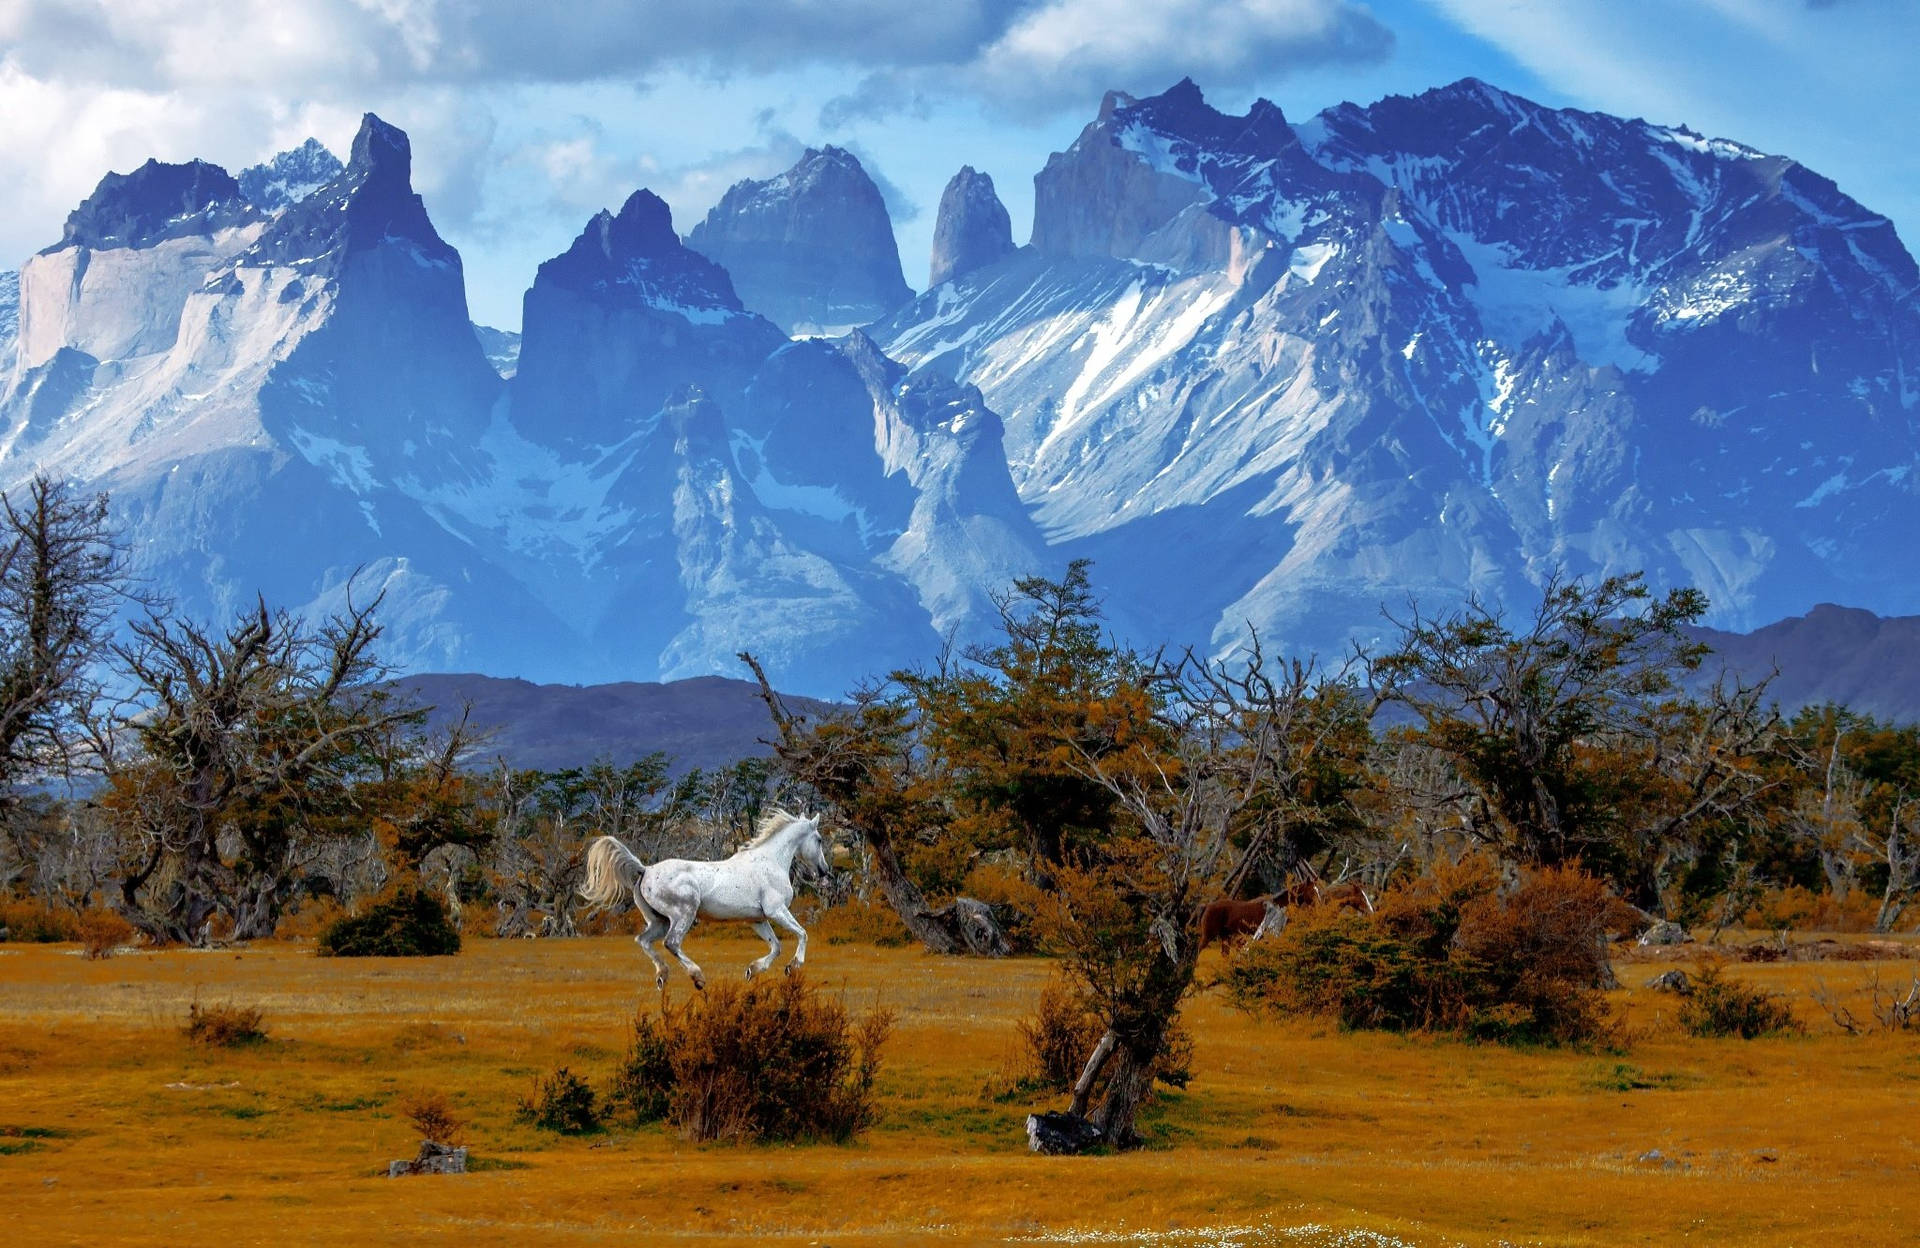 Animal Horse Patagonia Chile Mountain Landscape Torres Del Paine National Park Hd Wallpaper | Background Image Wallpaper